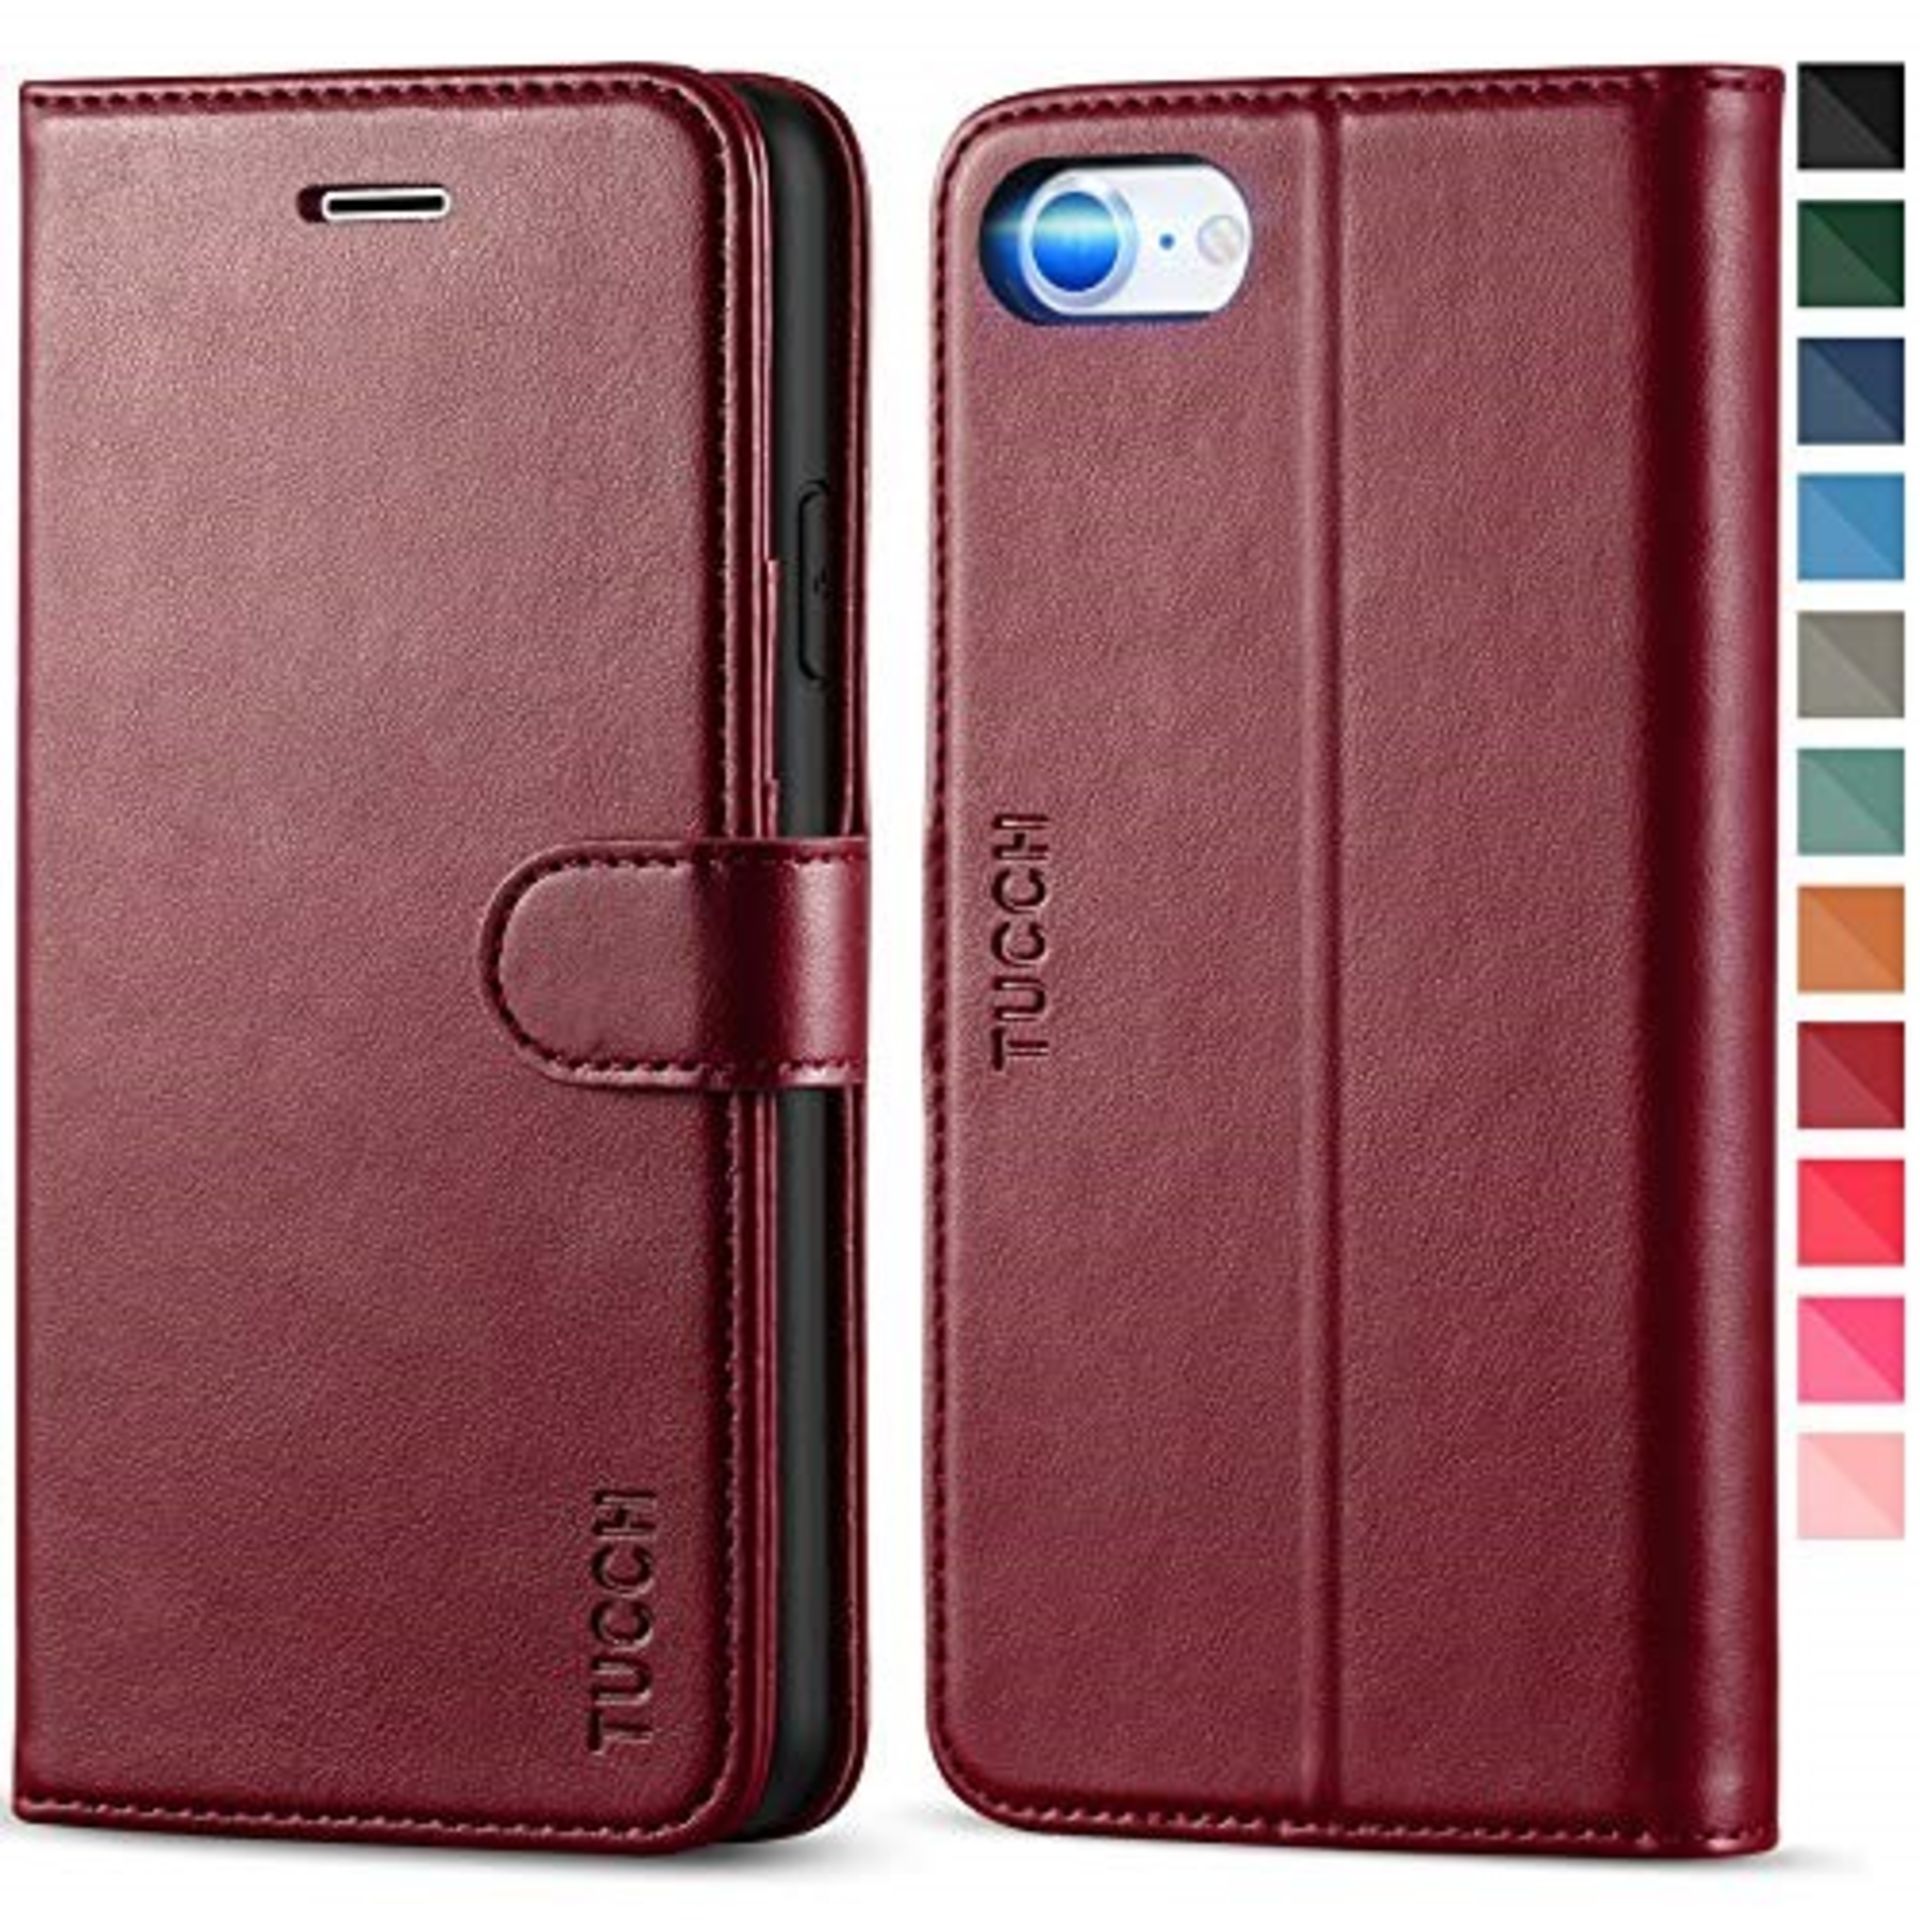 TUCCH iPhone SE 2020 Case, iPhone 8 Leather Case, iPhone 7 Wallet Case[Viewing Stand][